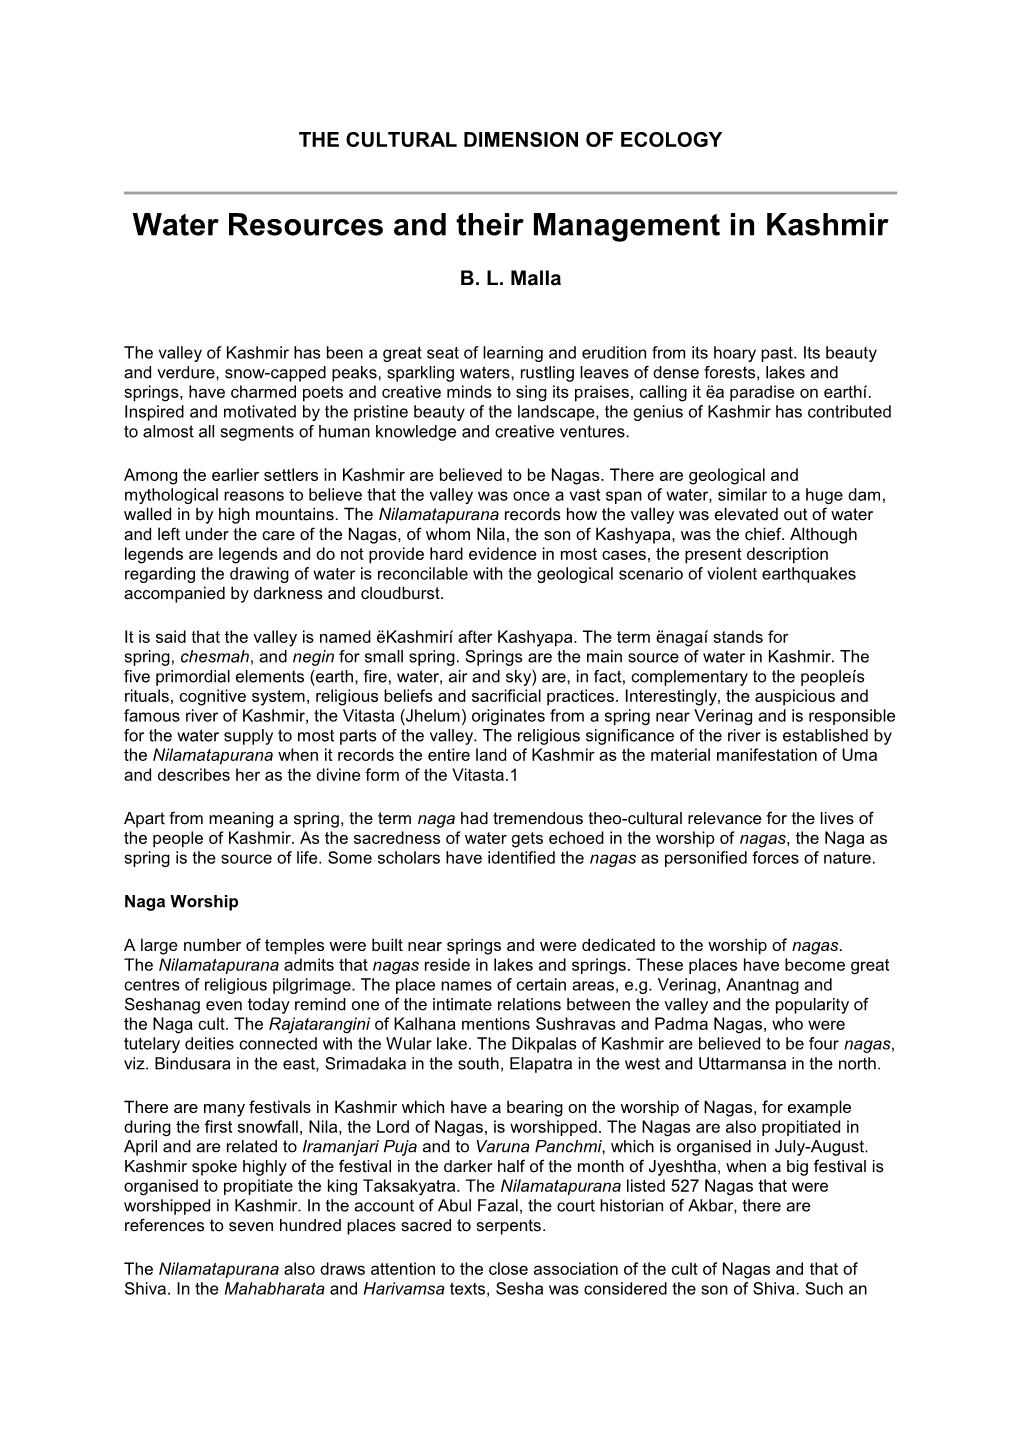 Water Resources and Their Management in Kashmir